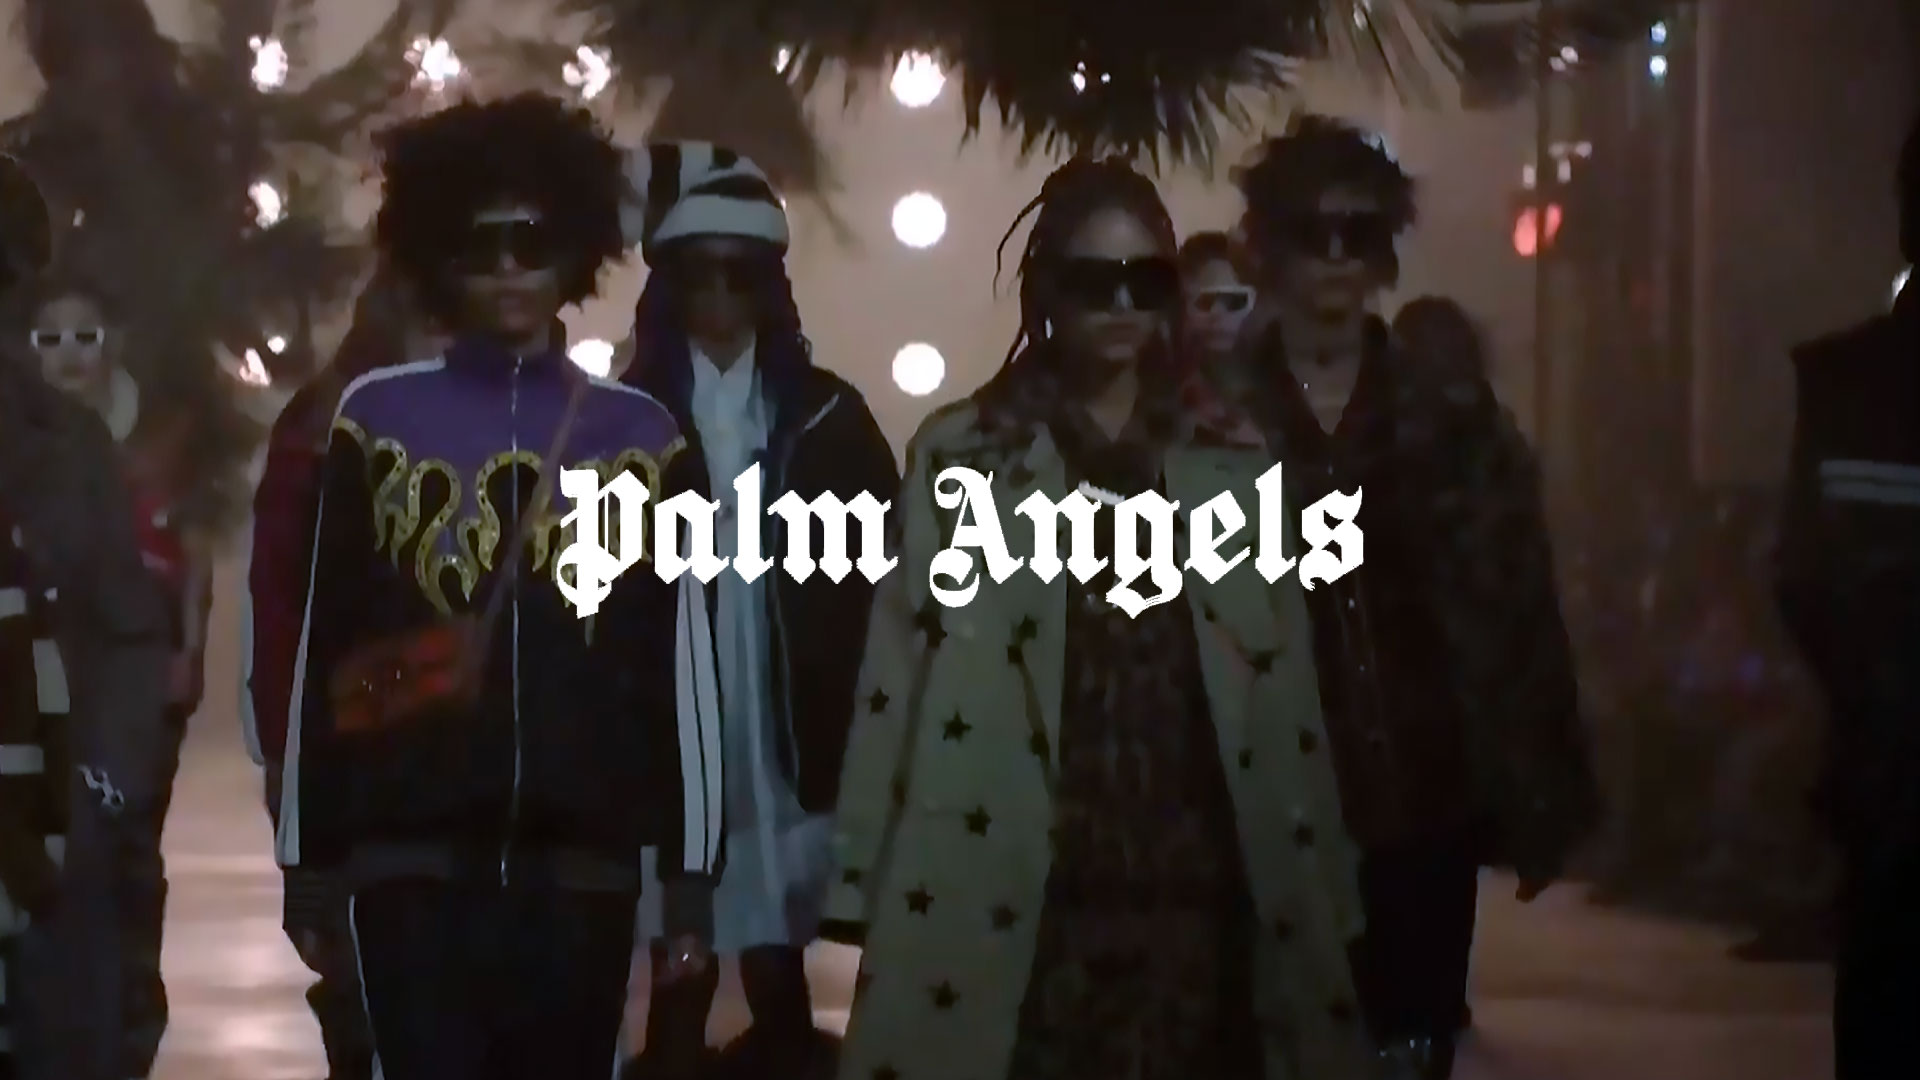 FALL-WINTER 2022/2023 PALM ANGELS MILAN FASHION WEEK READY-TO-WEAR WOMEN'S COLLECTION